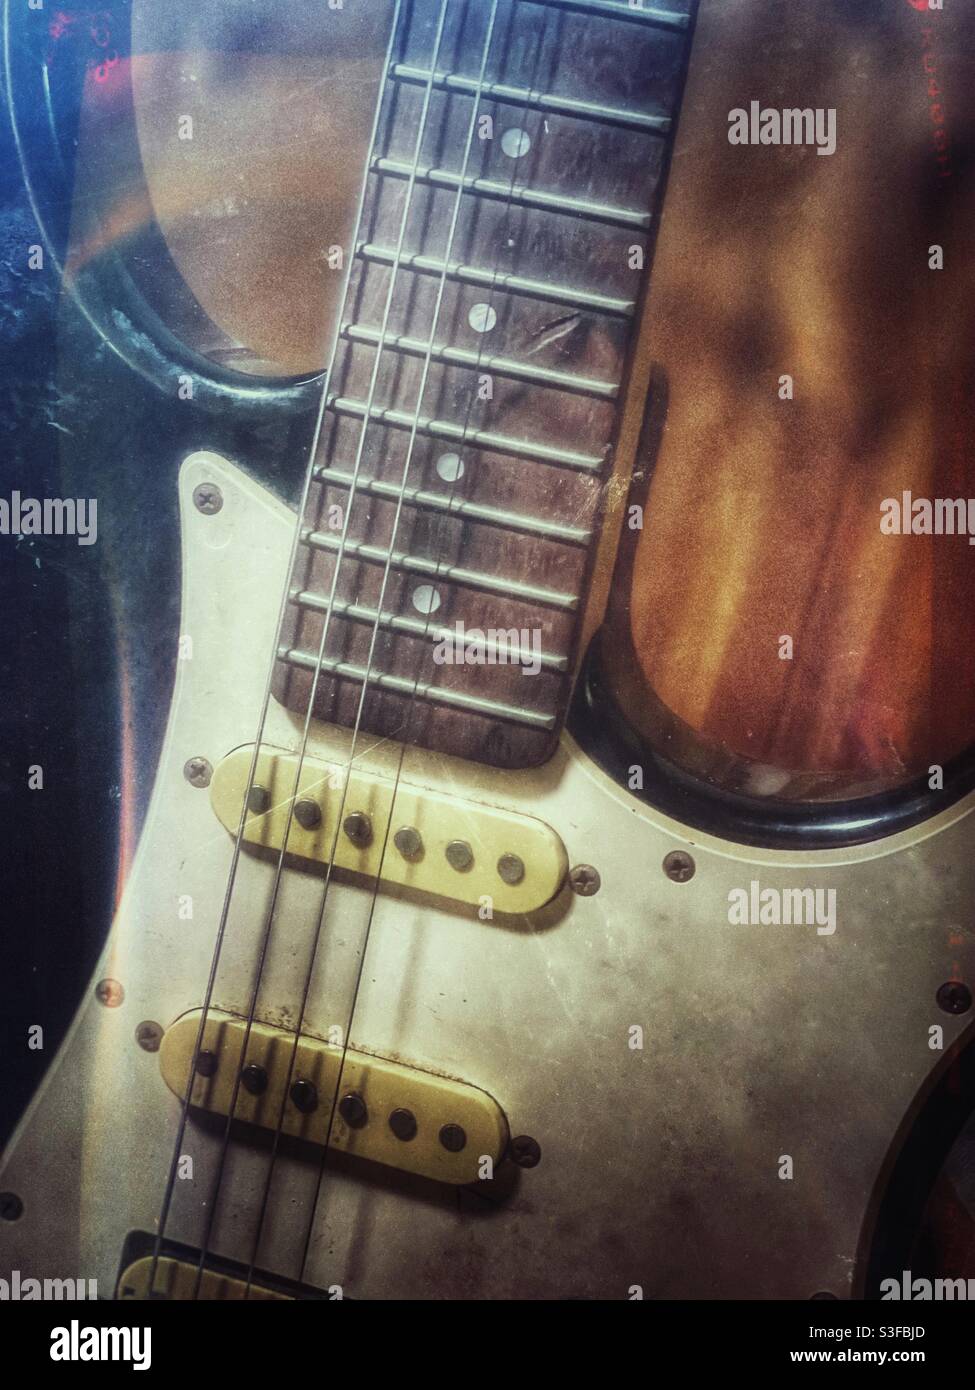 Beat up old electric guitar with grunge and light leak film effects Stock Photo